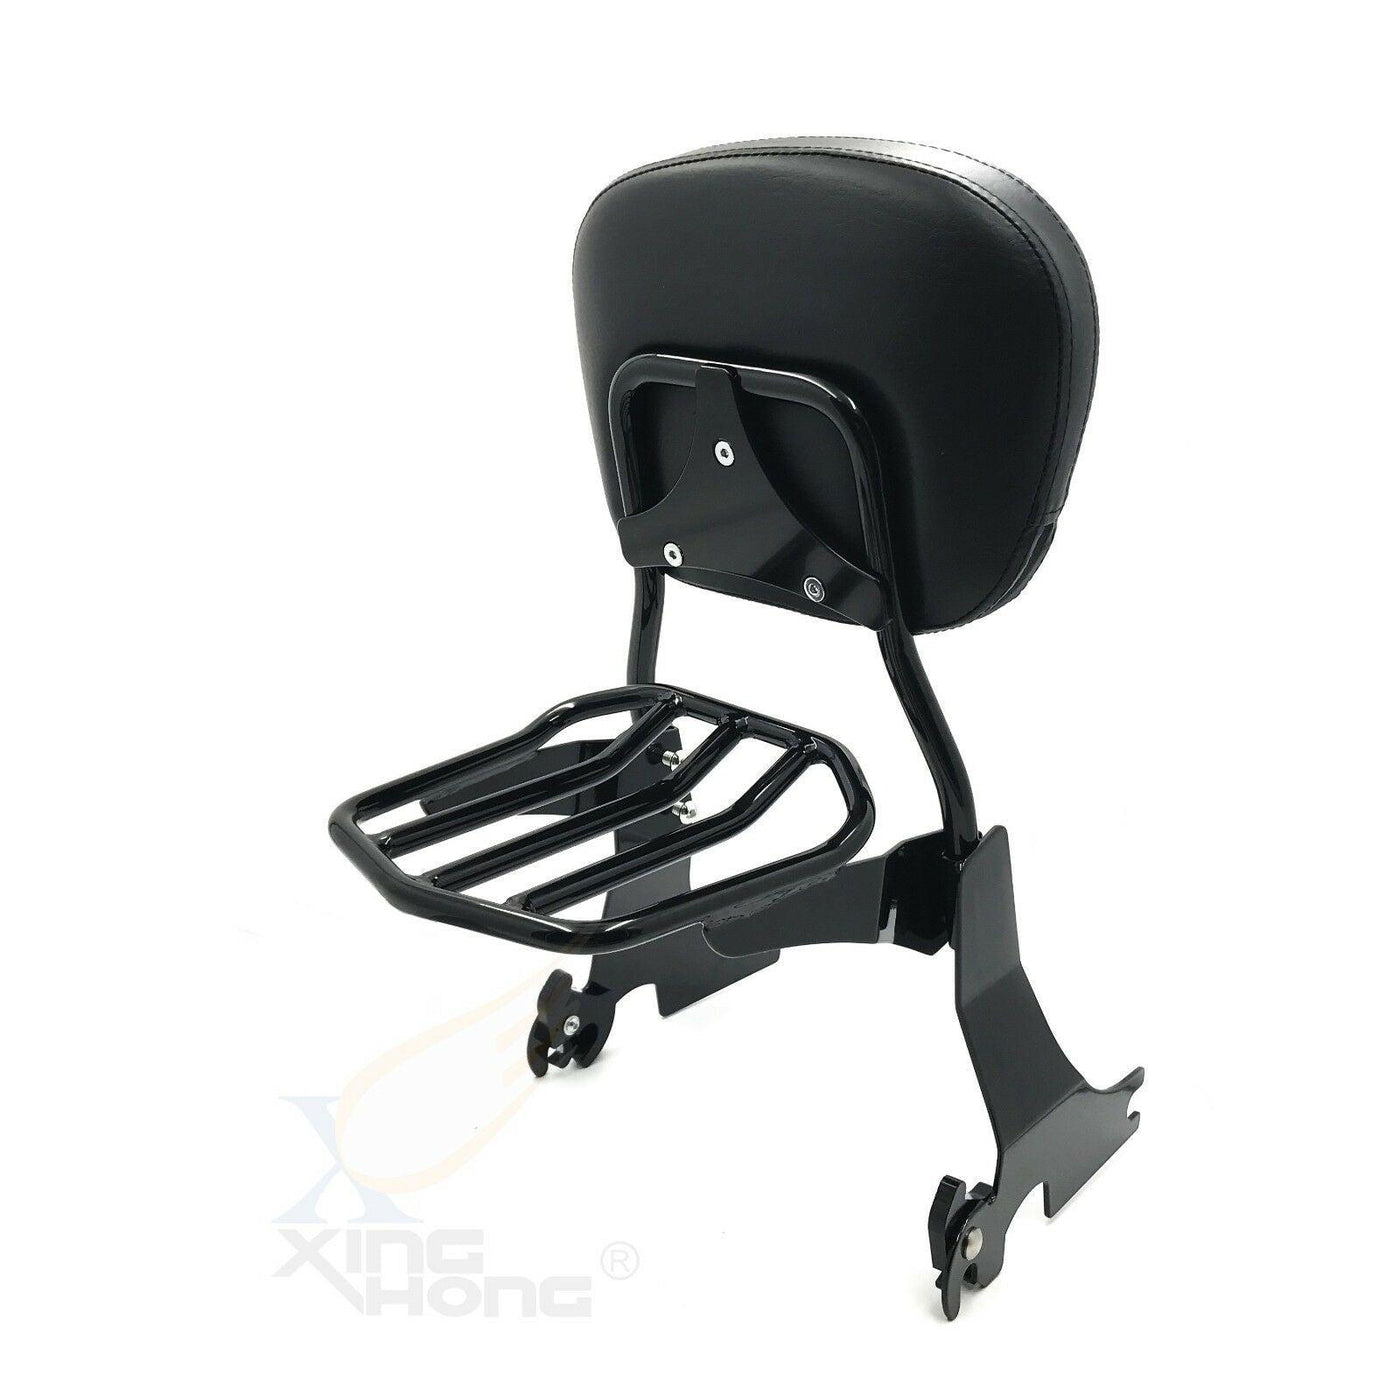 Low Sissy Bar Backrest & Luggage Rack For Harley Sportster XL 883 1200 2004-2017 - Moto Life Products